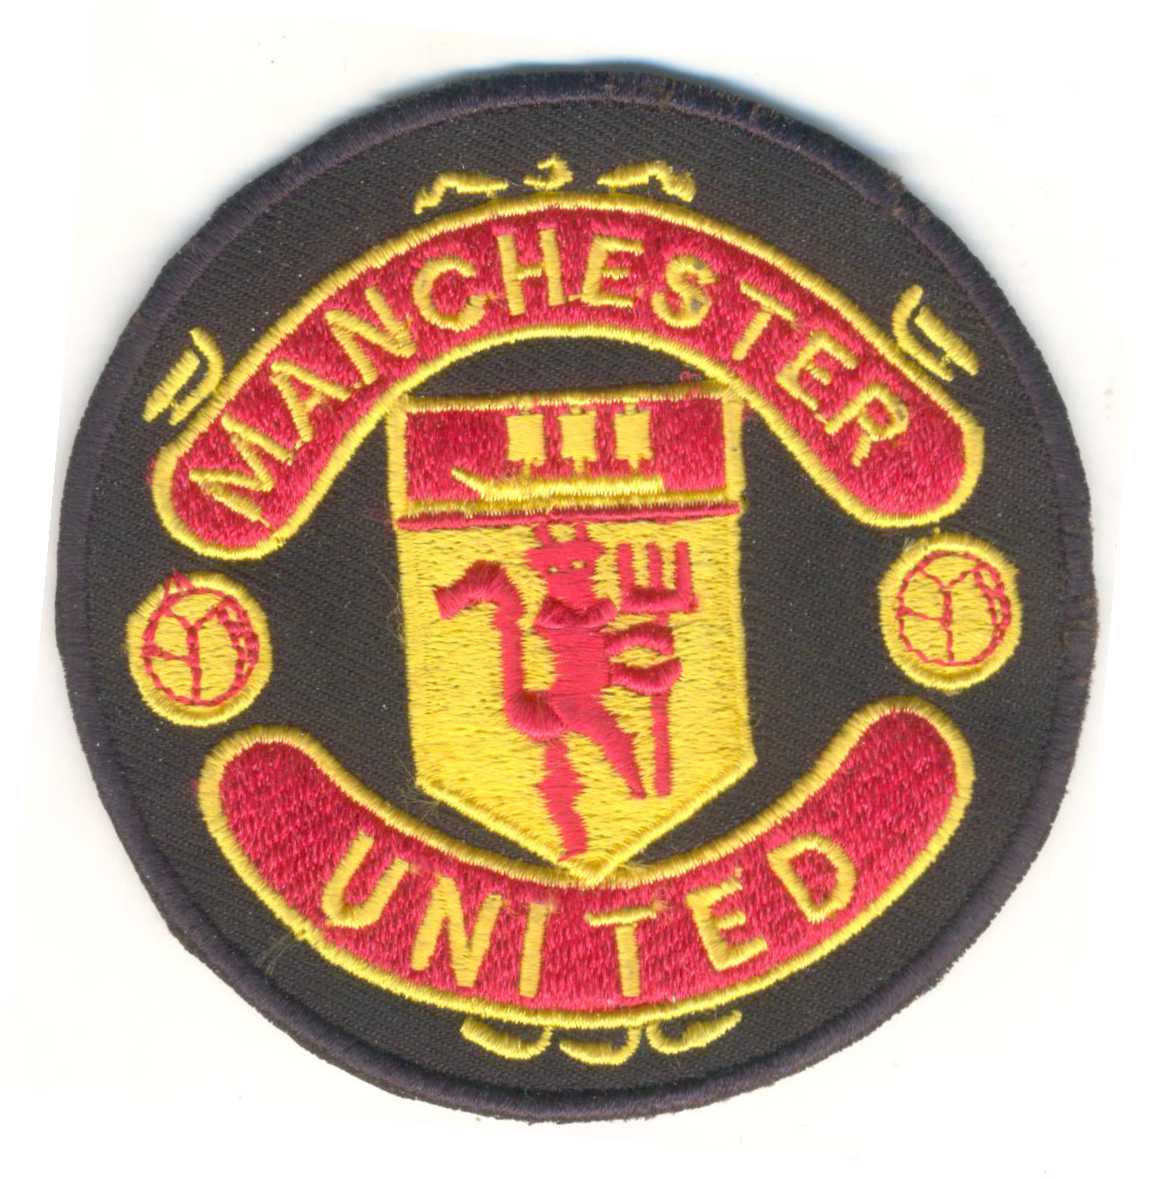  Manchester United Patch